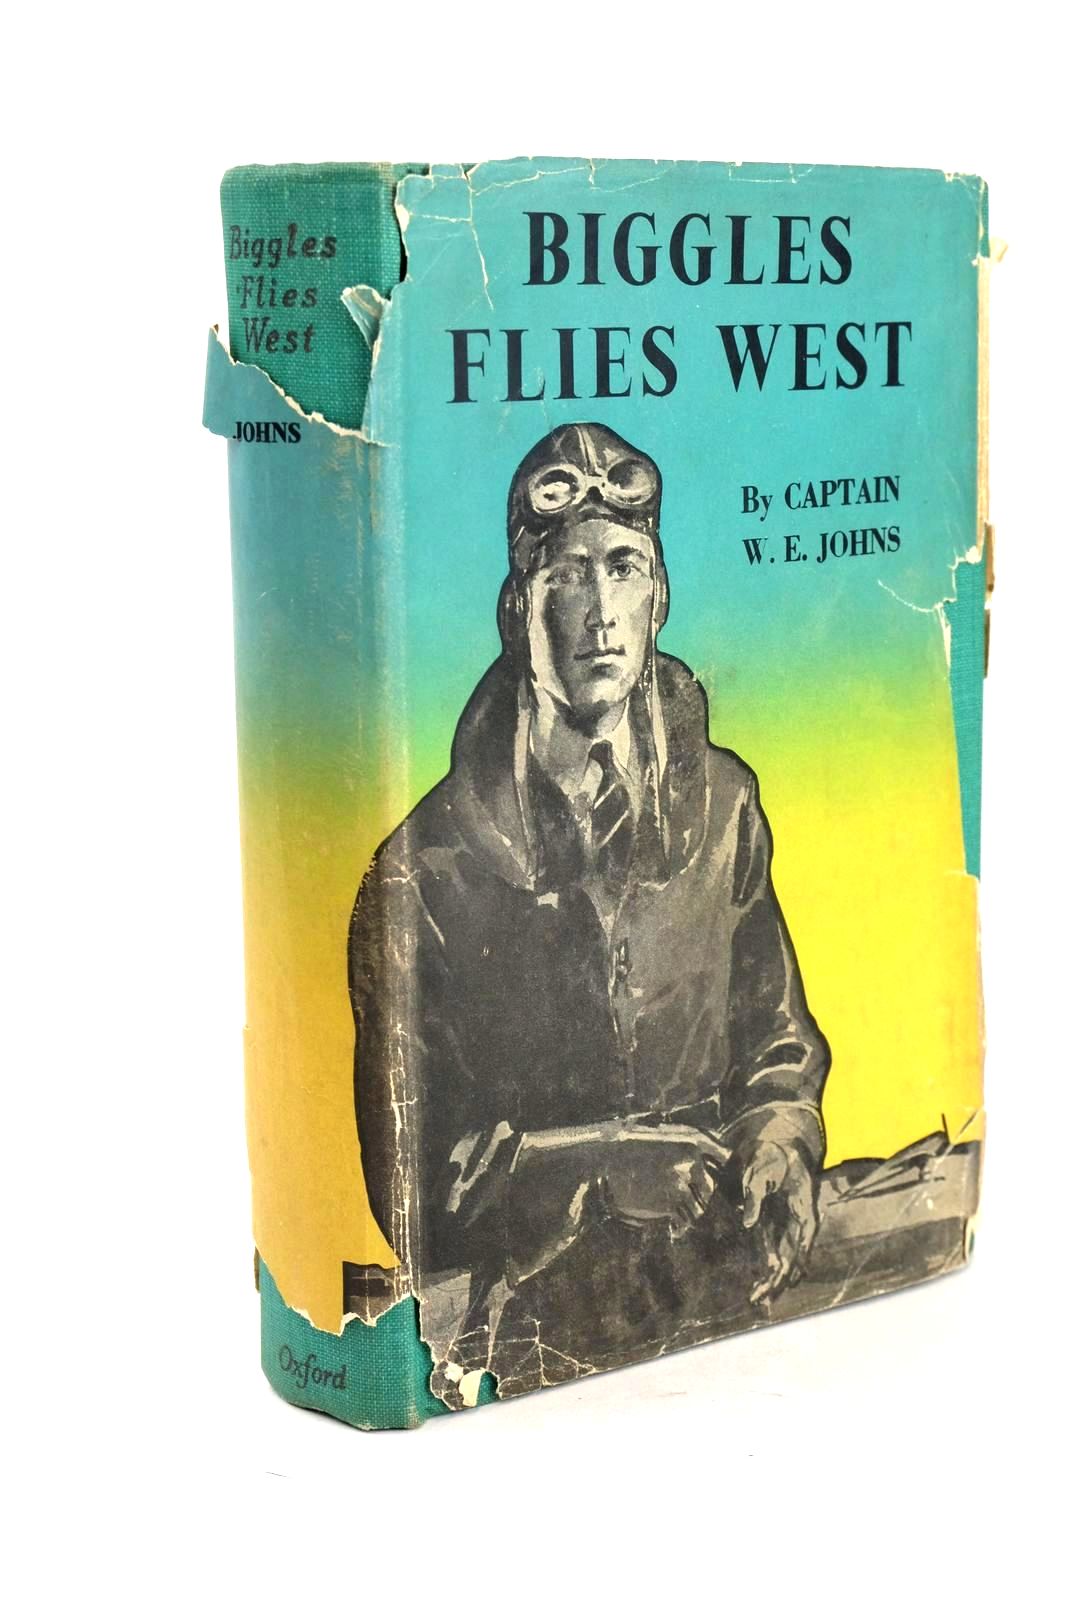 Photo of BIGGLES FLIES WEST written by Johns, W.E. illustrated by Sindall, Alfred published by Oxford University Press, Geoffrey Cumberlege (STOCK CODE: 1326371)  for sale by Stella & Rose's Books